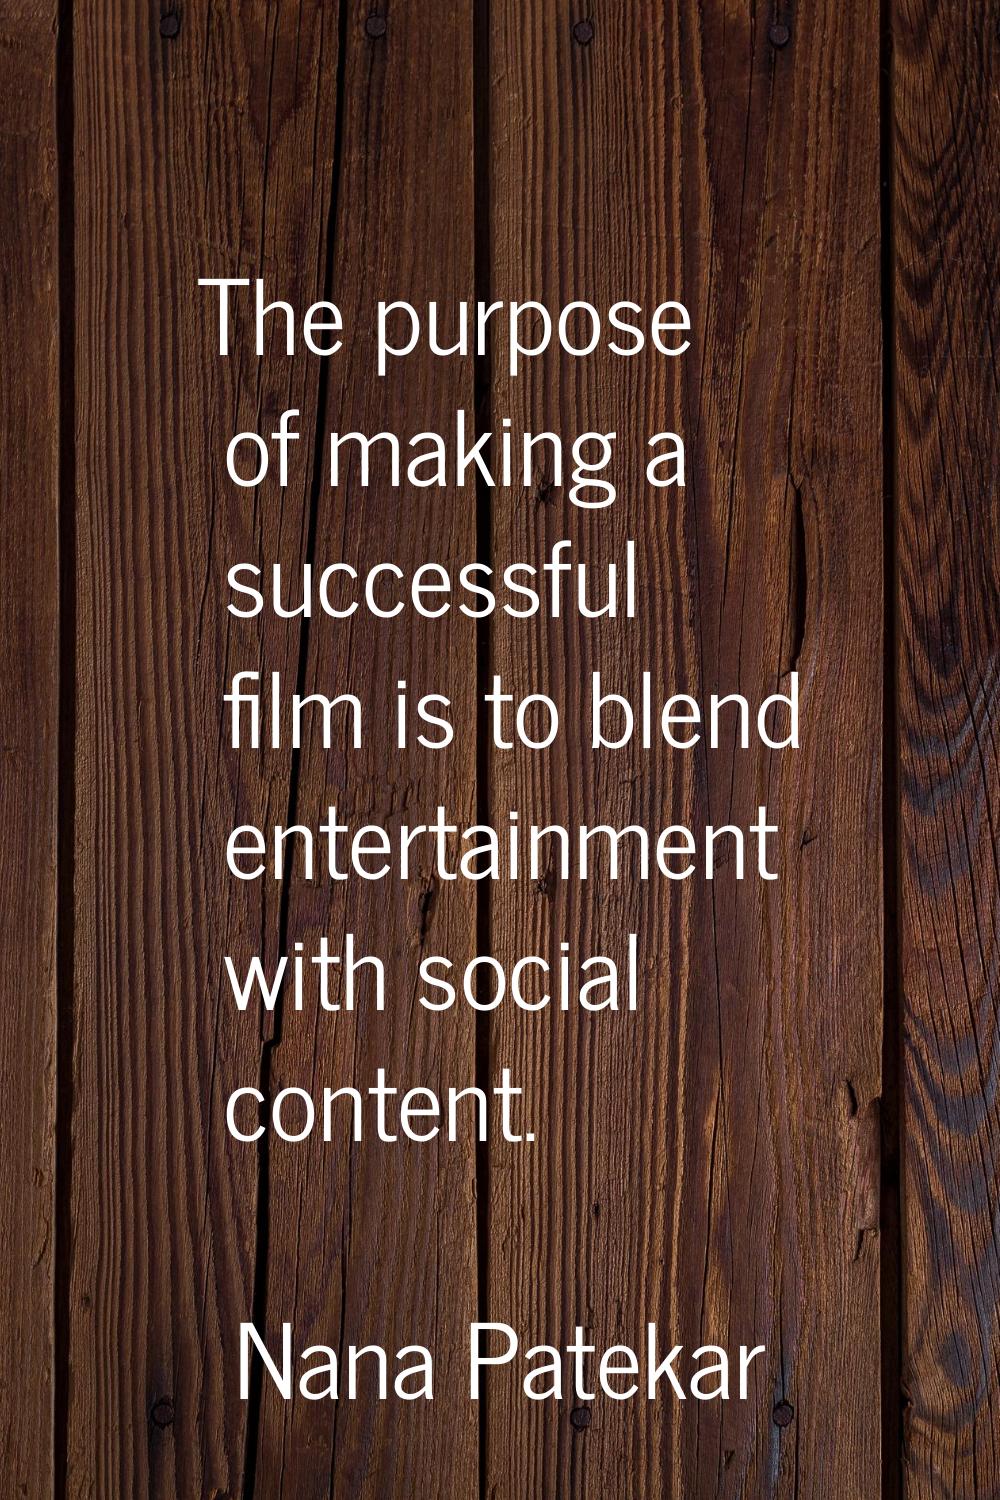 The purpose of making a successful film is to blend entertainment with social content.